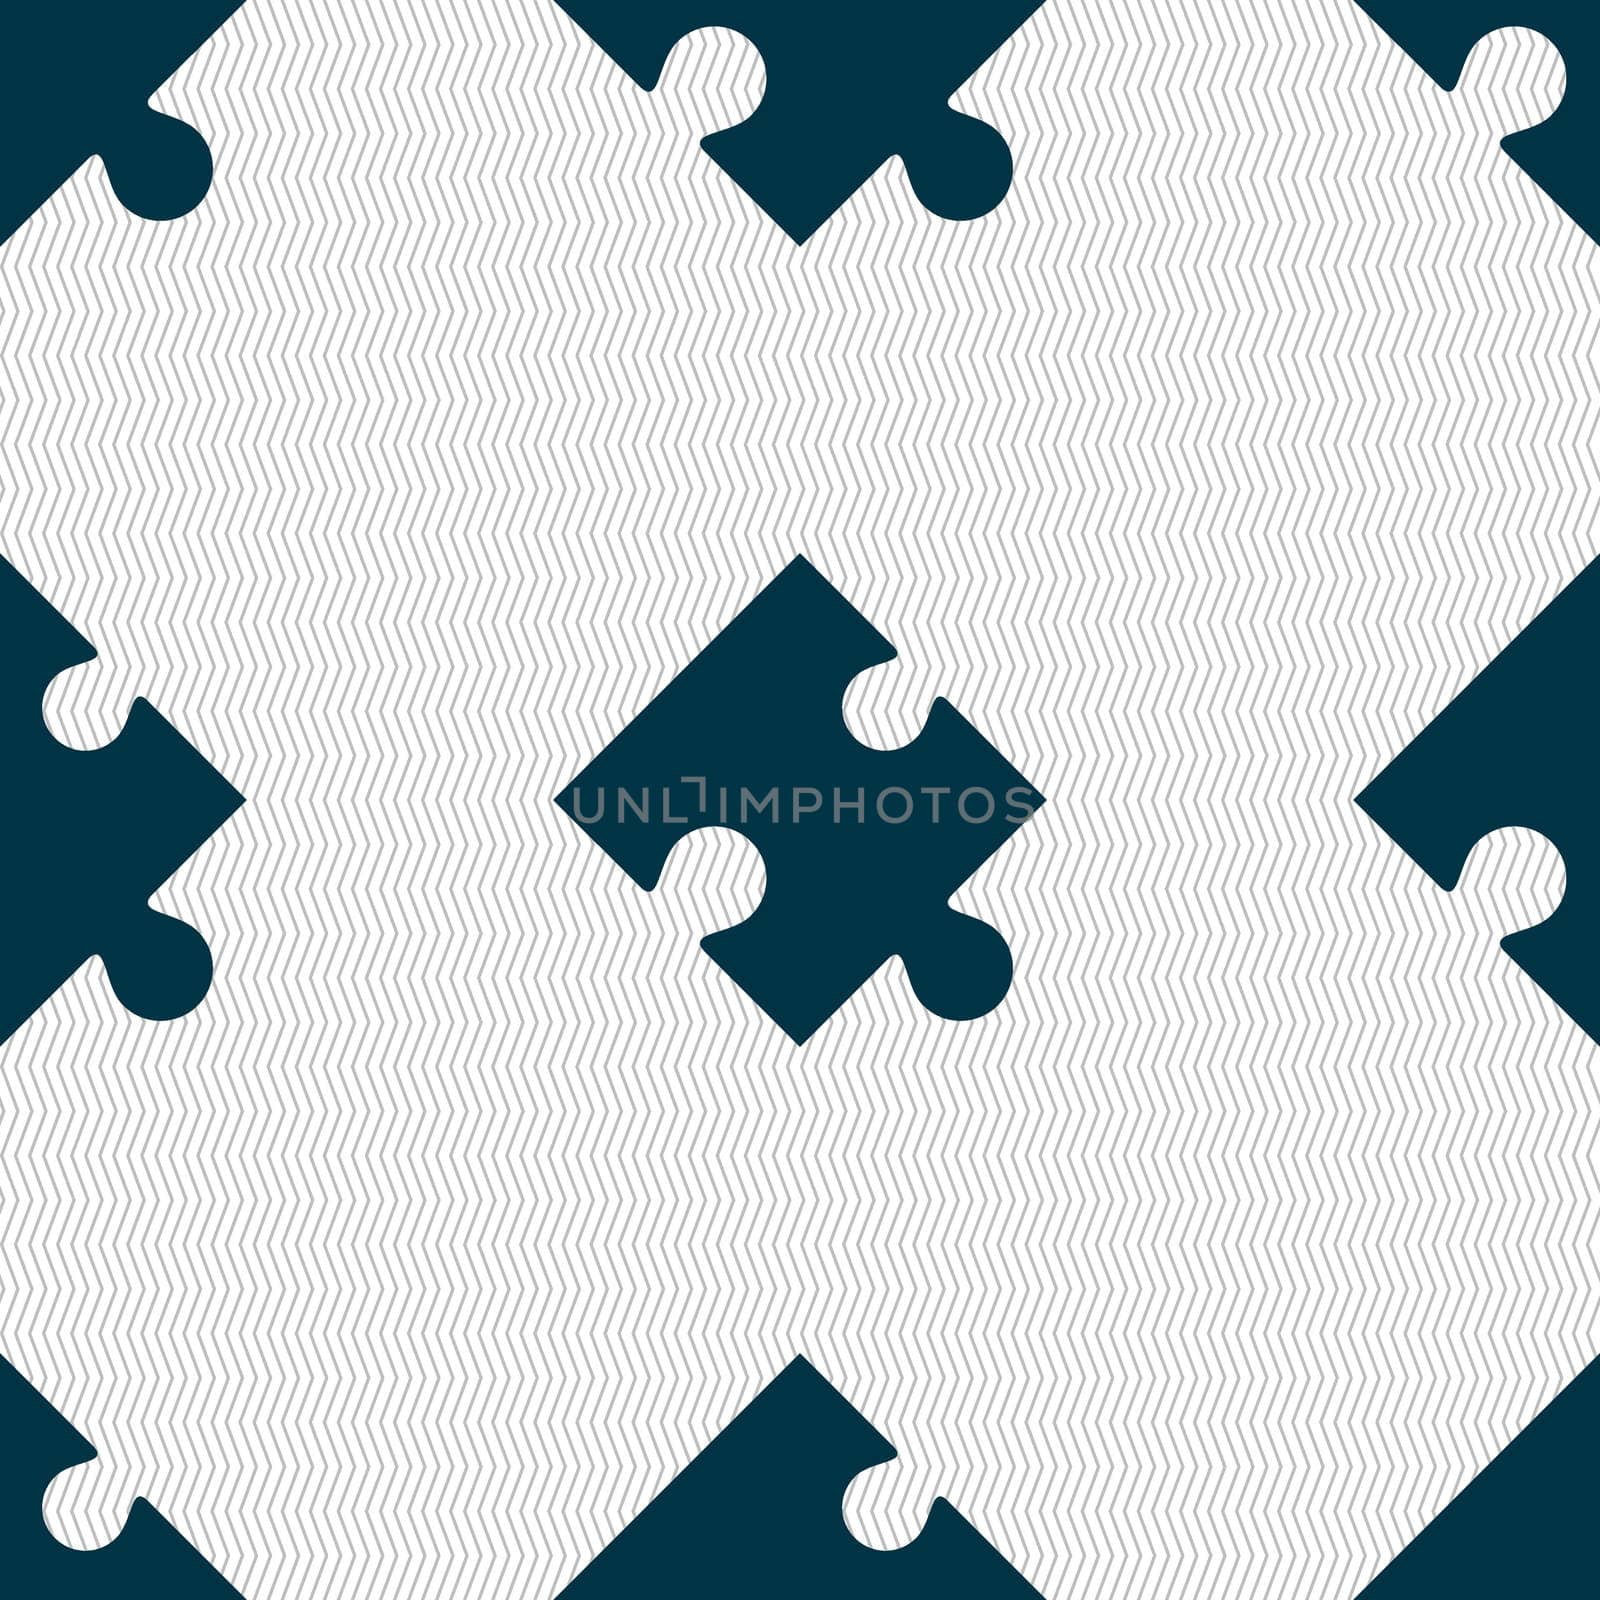 Puzzle piece icon sign. Seamless abstract background with geometric shapes. illustration